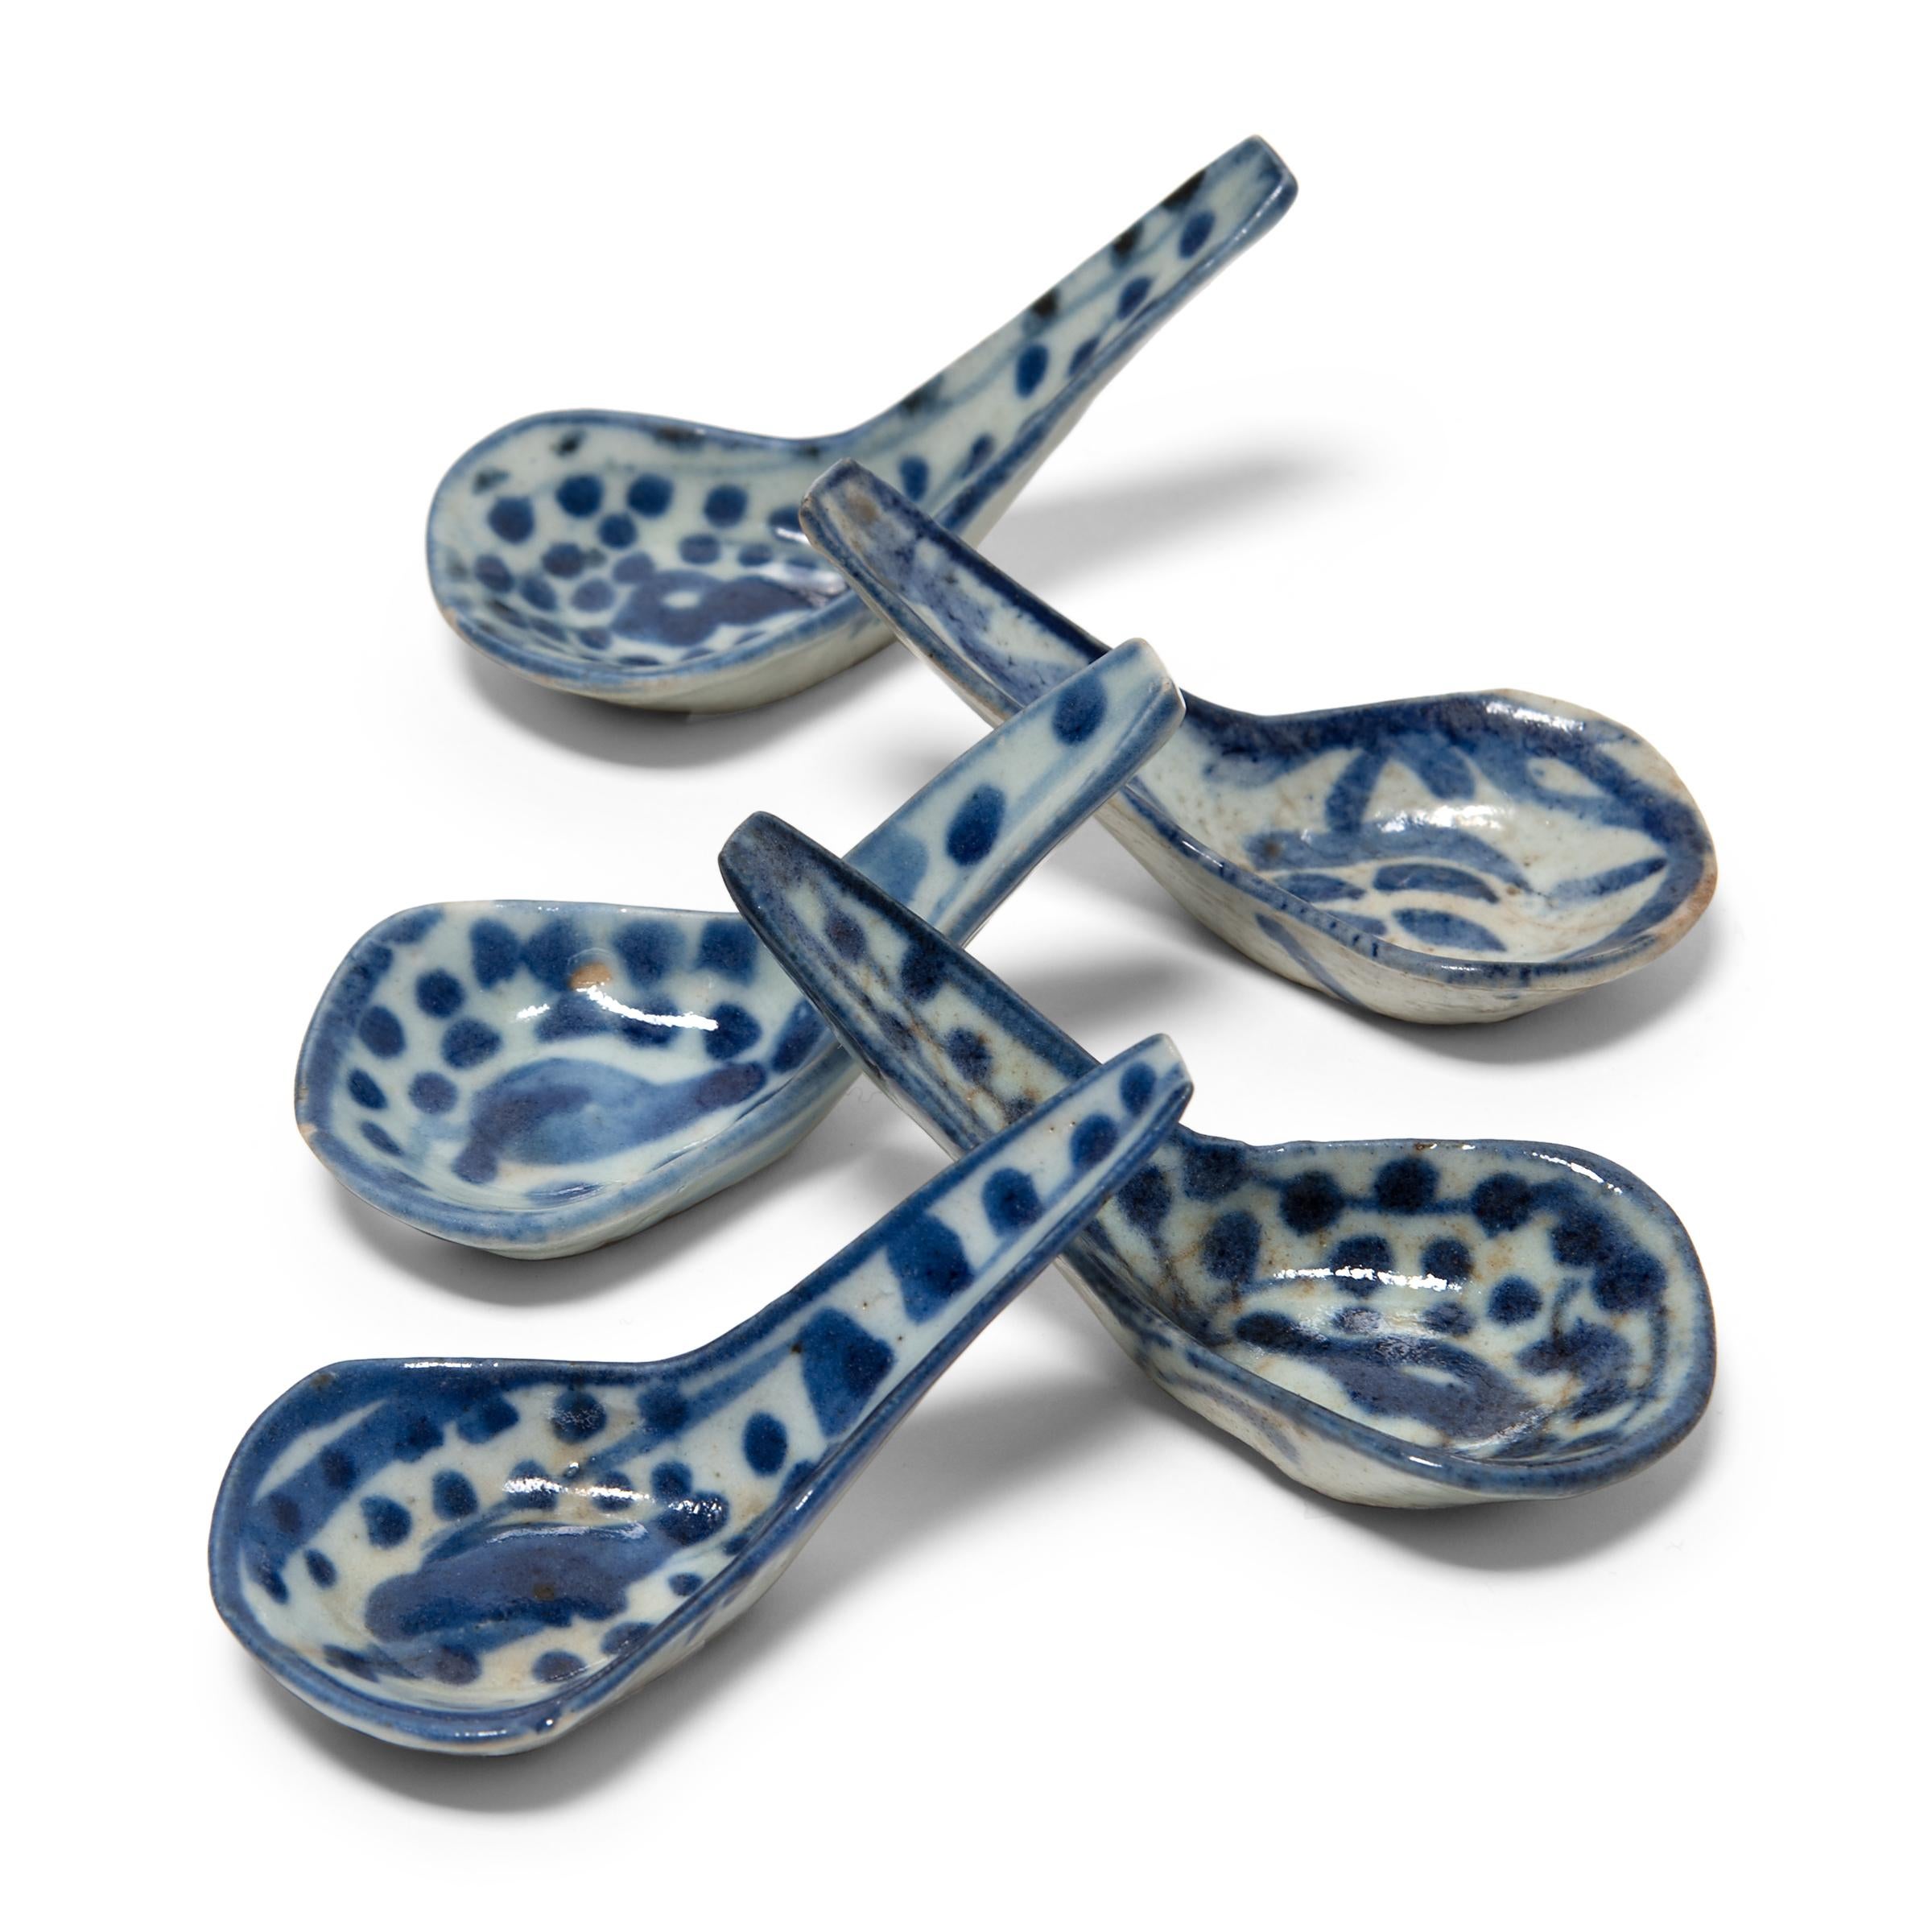 Qing Set of Five 19th Century Chinese Blue and White Spoons